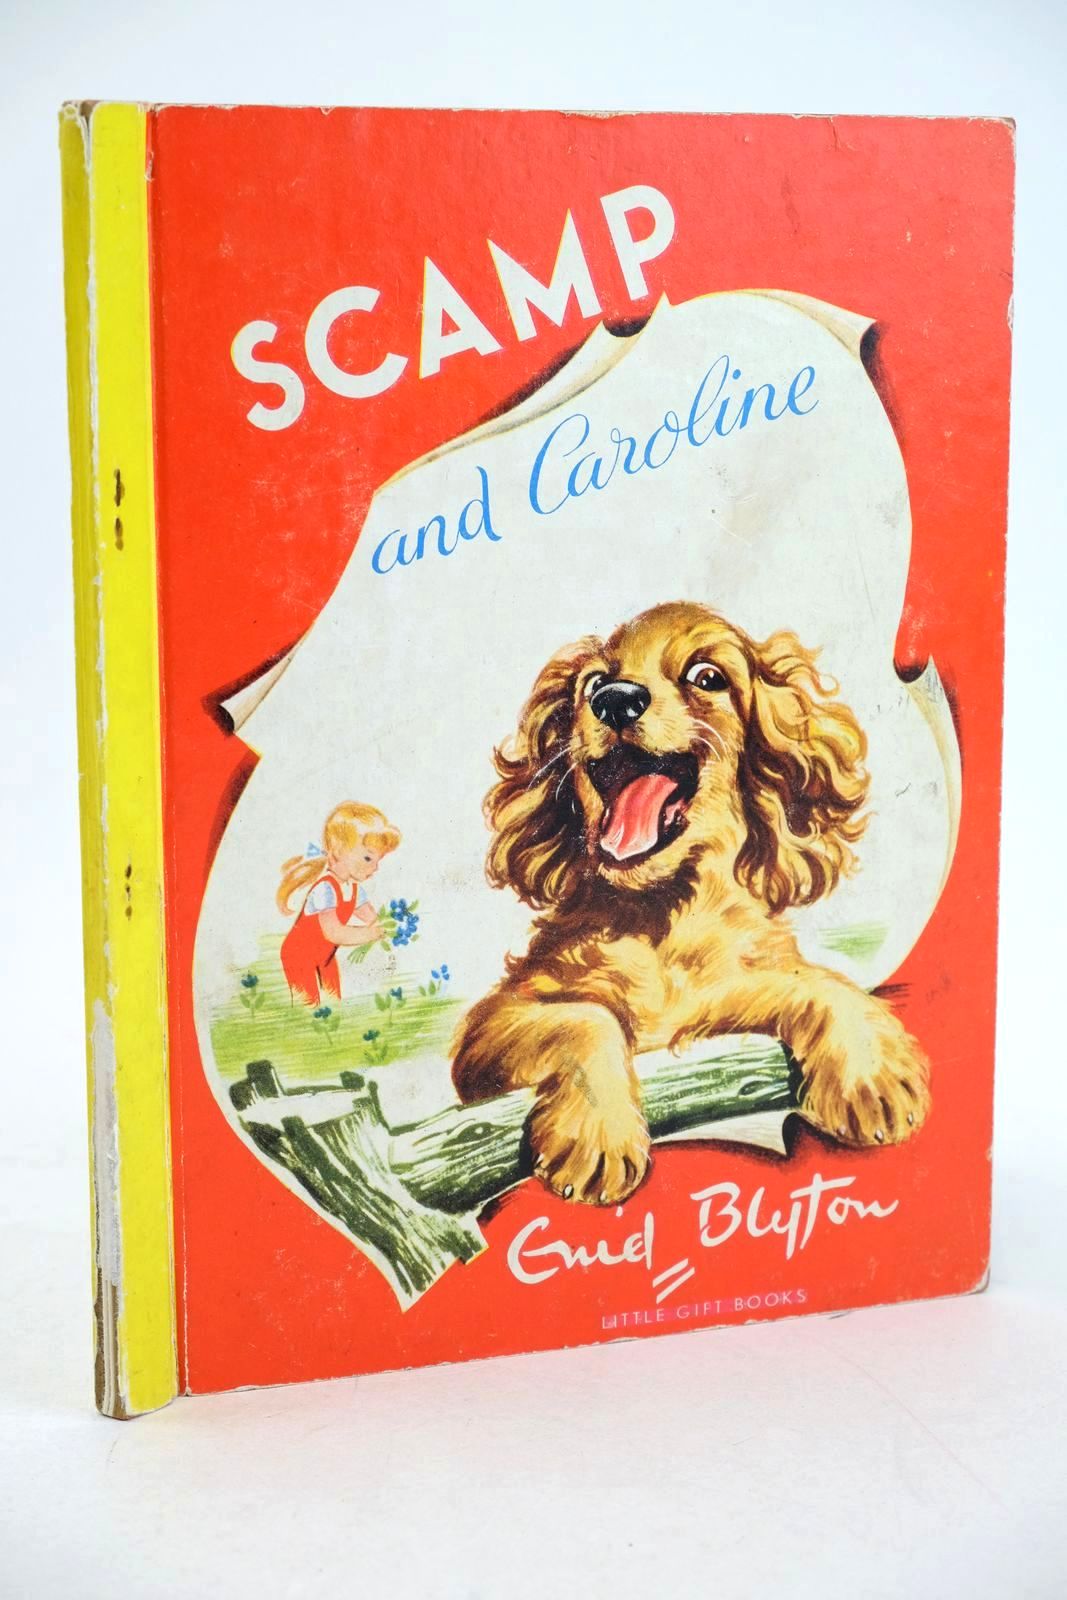 Photo of SCAMP AND CAROLINE written by Blyton, Enid illustrated by Probst, Pierre published by Hackett's, Blackie (STOCK CODE: 1327431)  for sale by Stella & Rose's Books